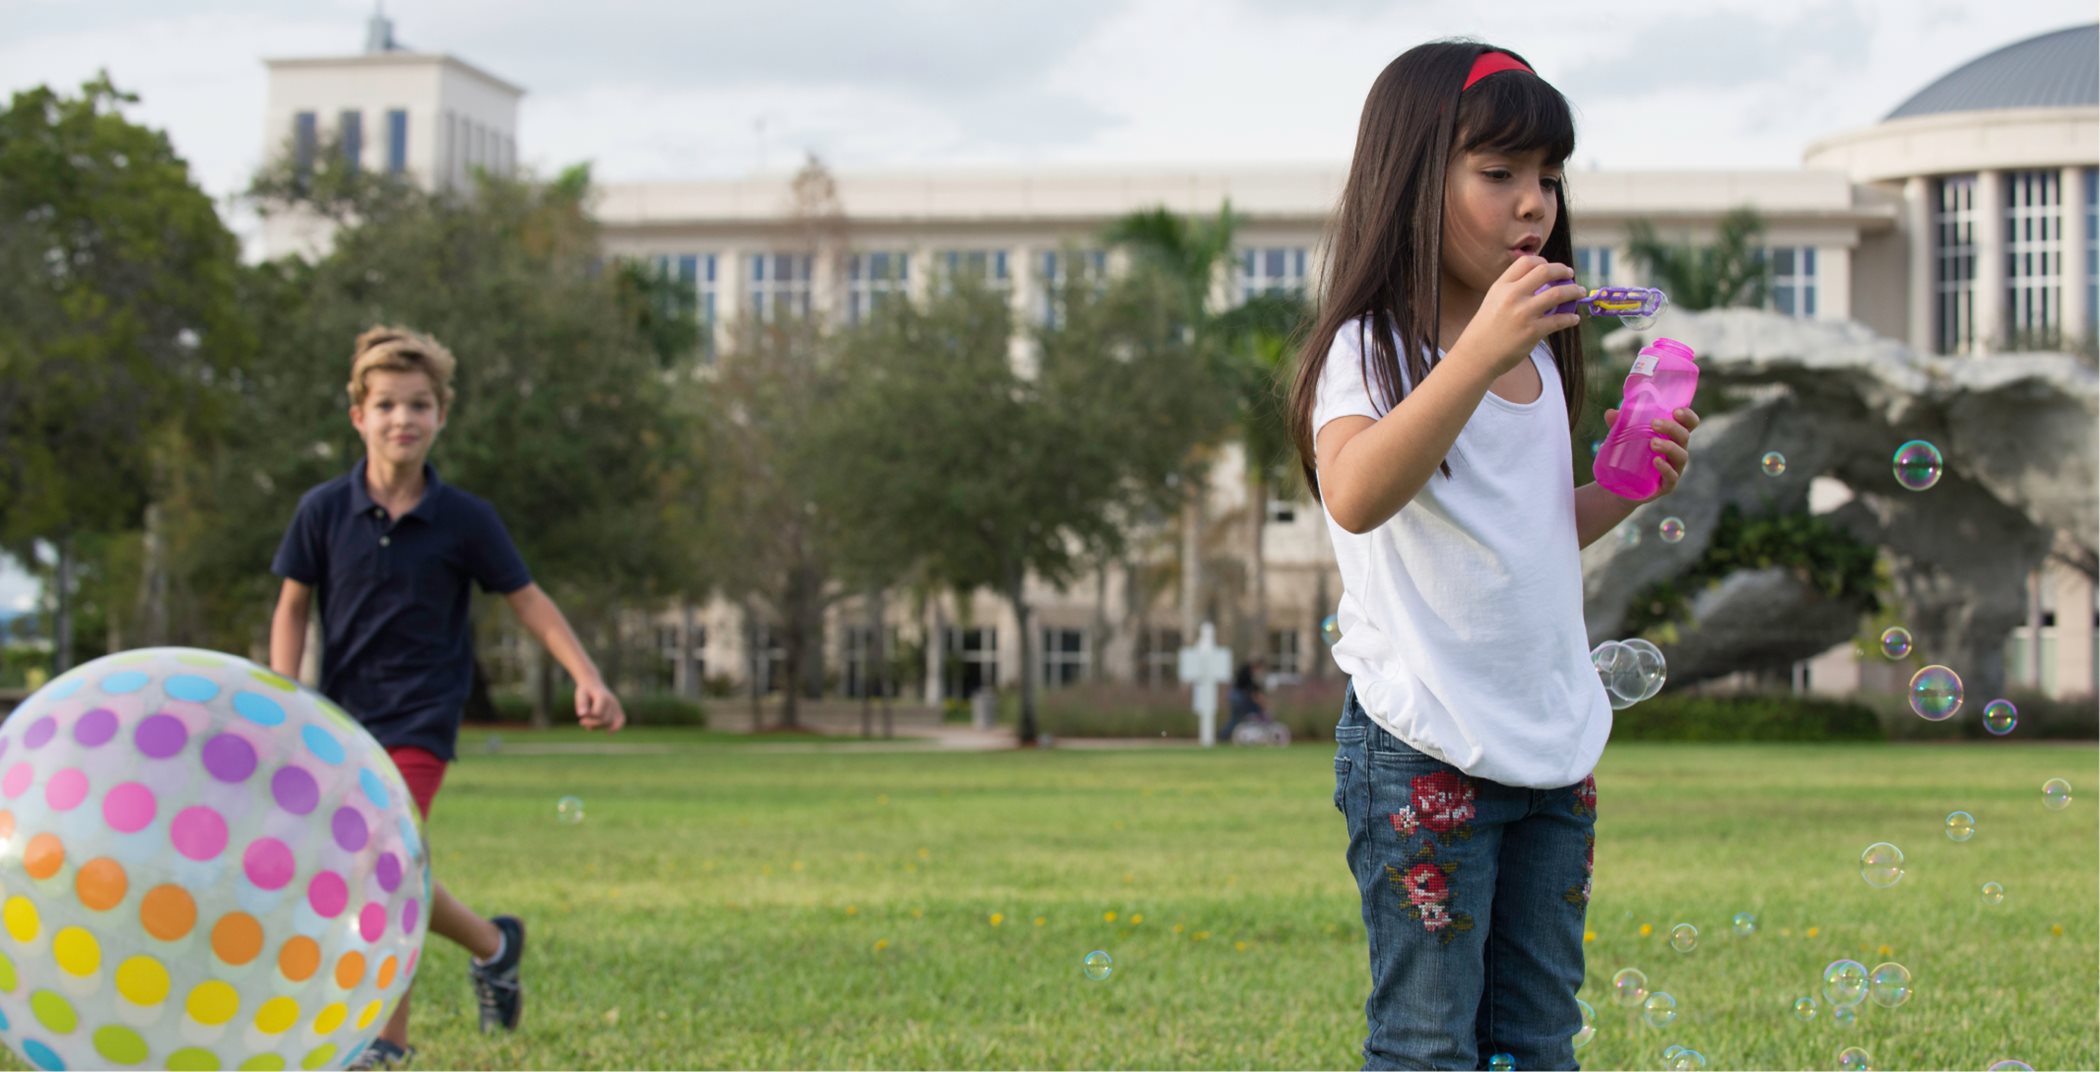 Little girl blowing bubbles in the park